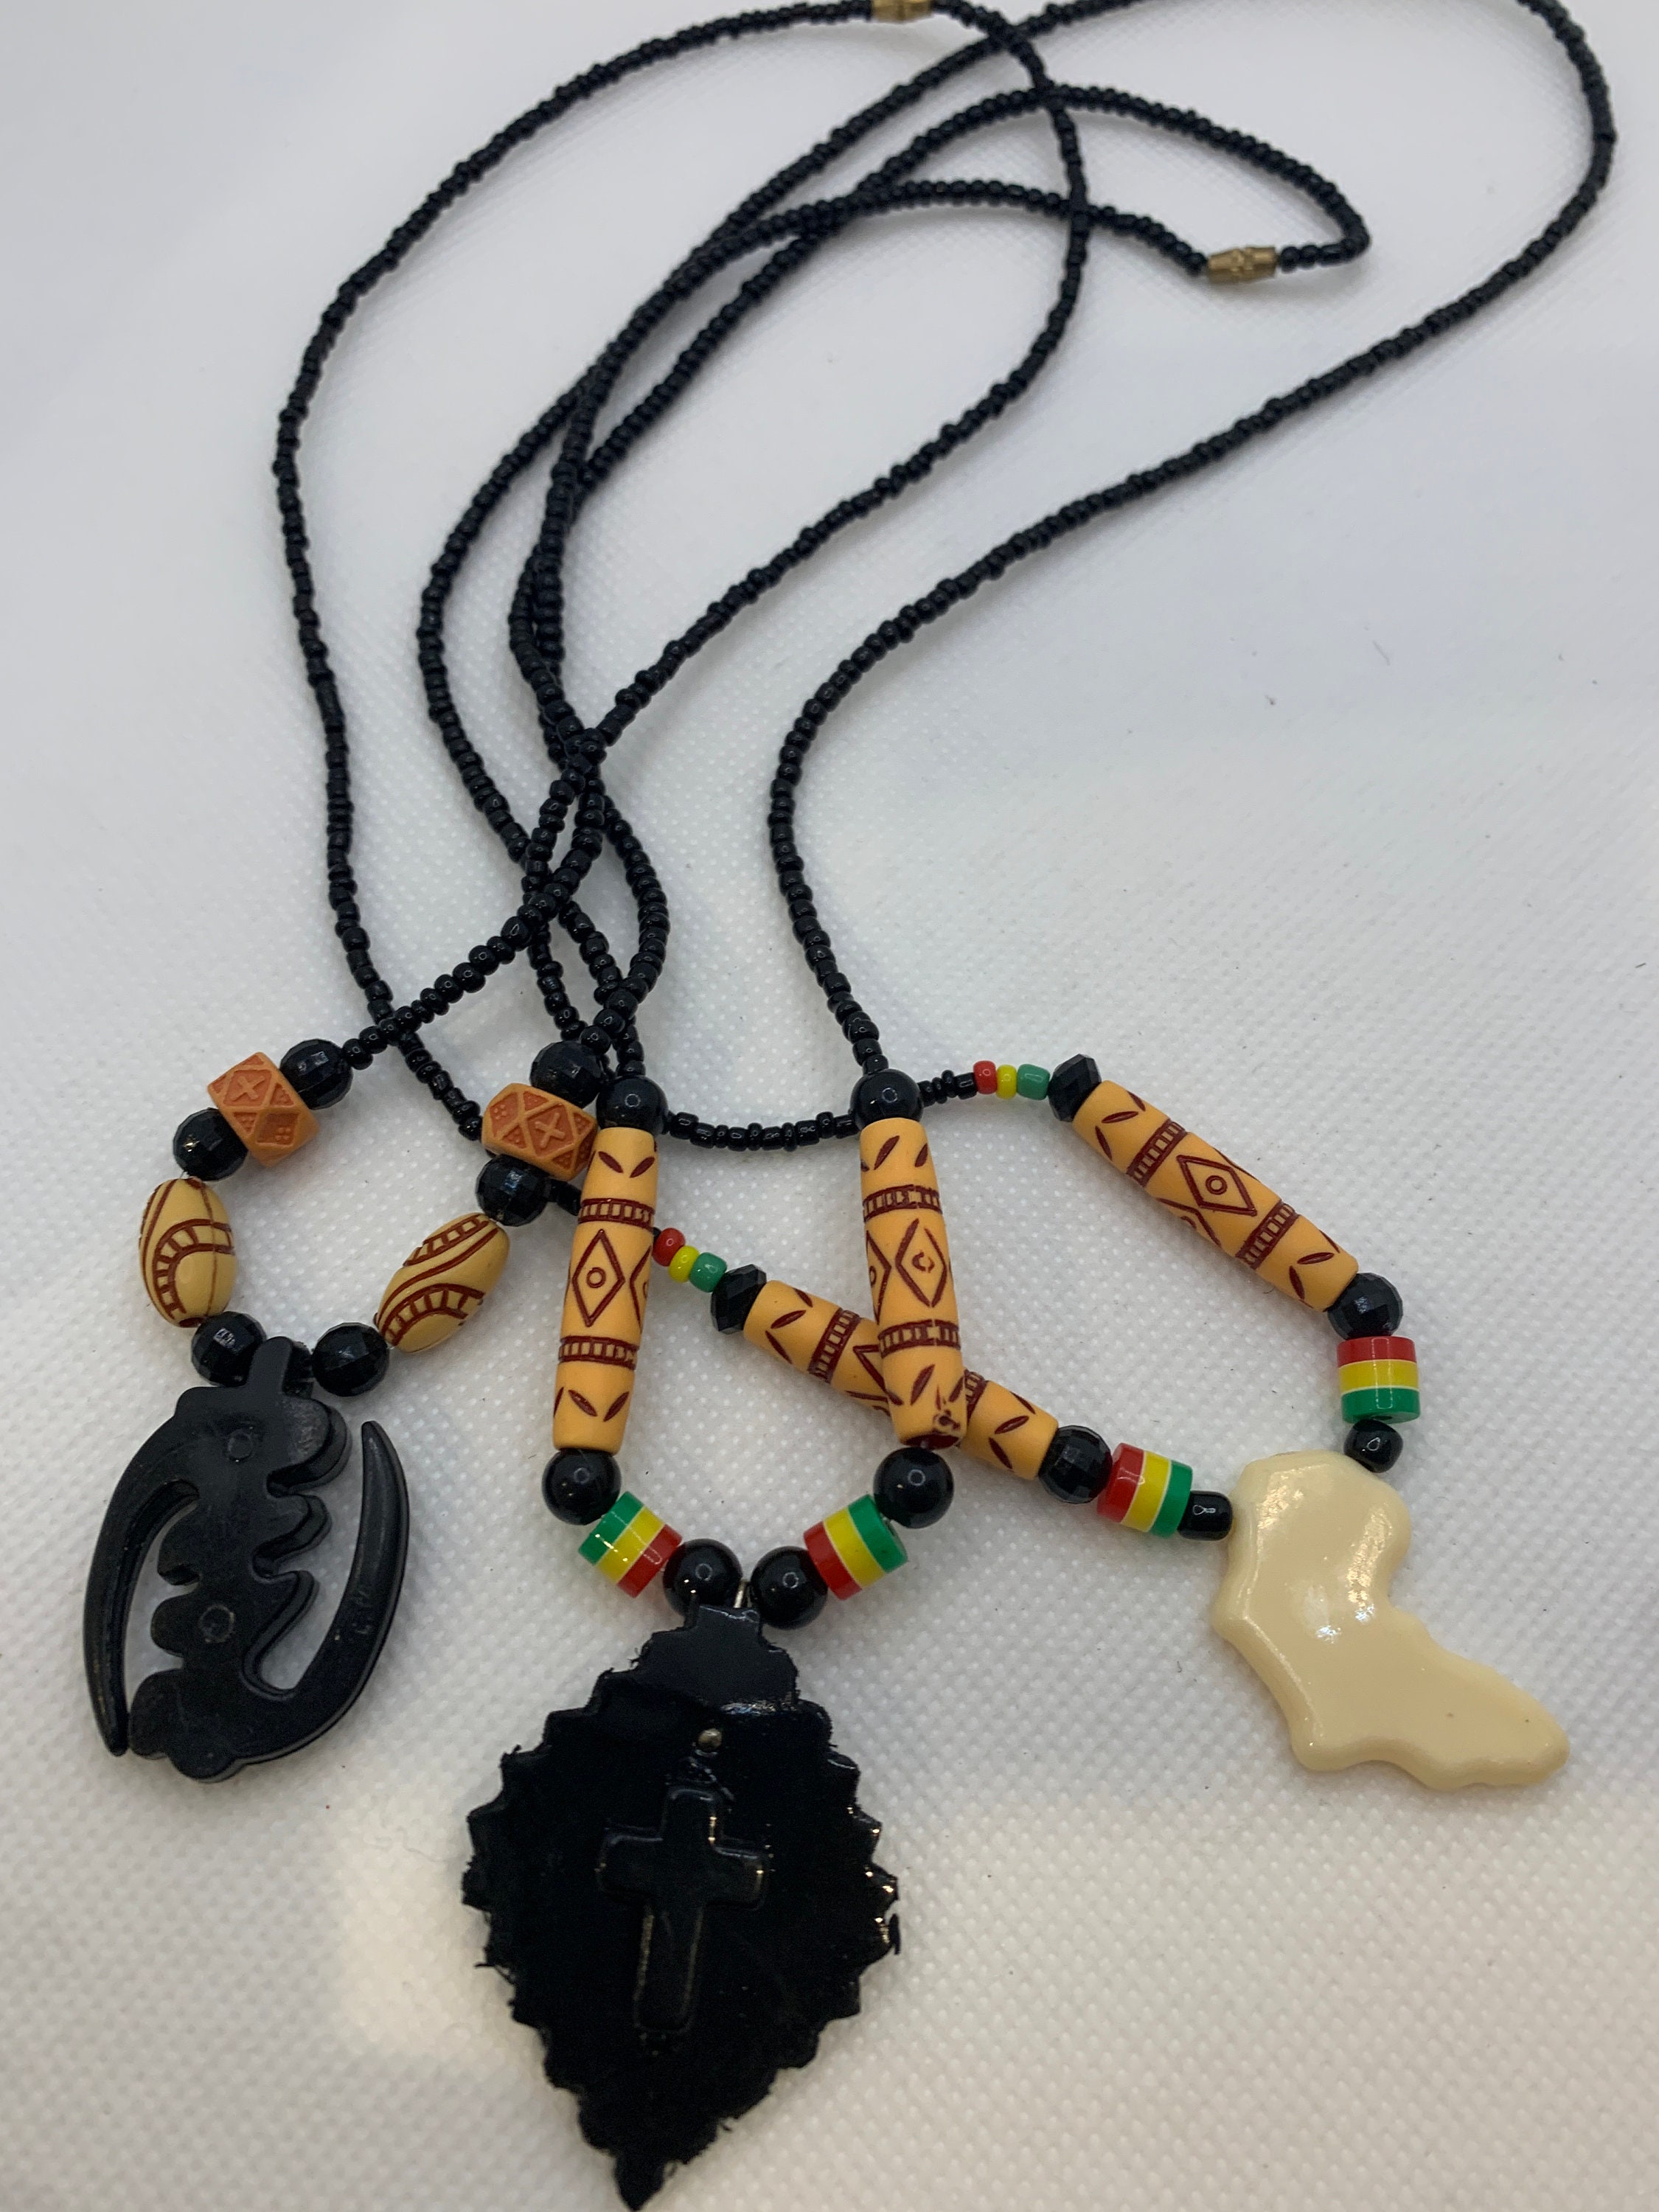 Pat Simon's Necklaces made from African Beads